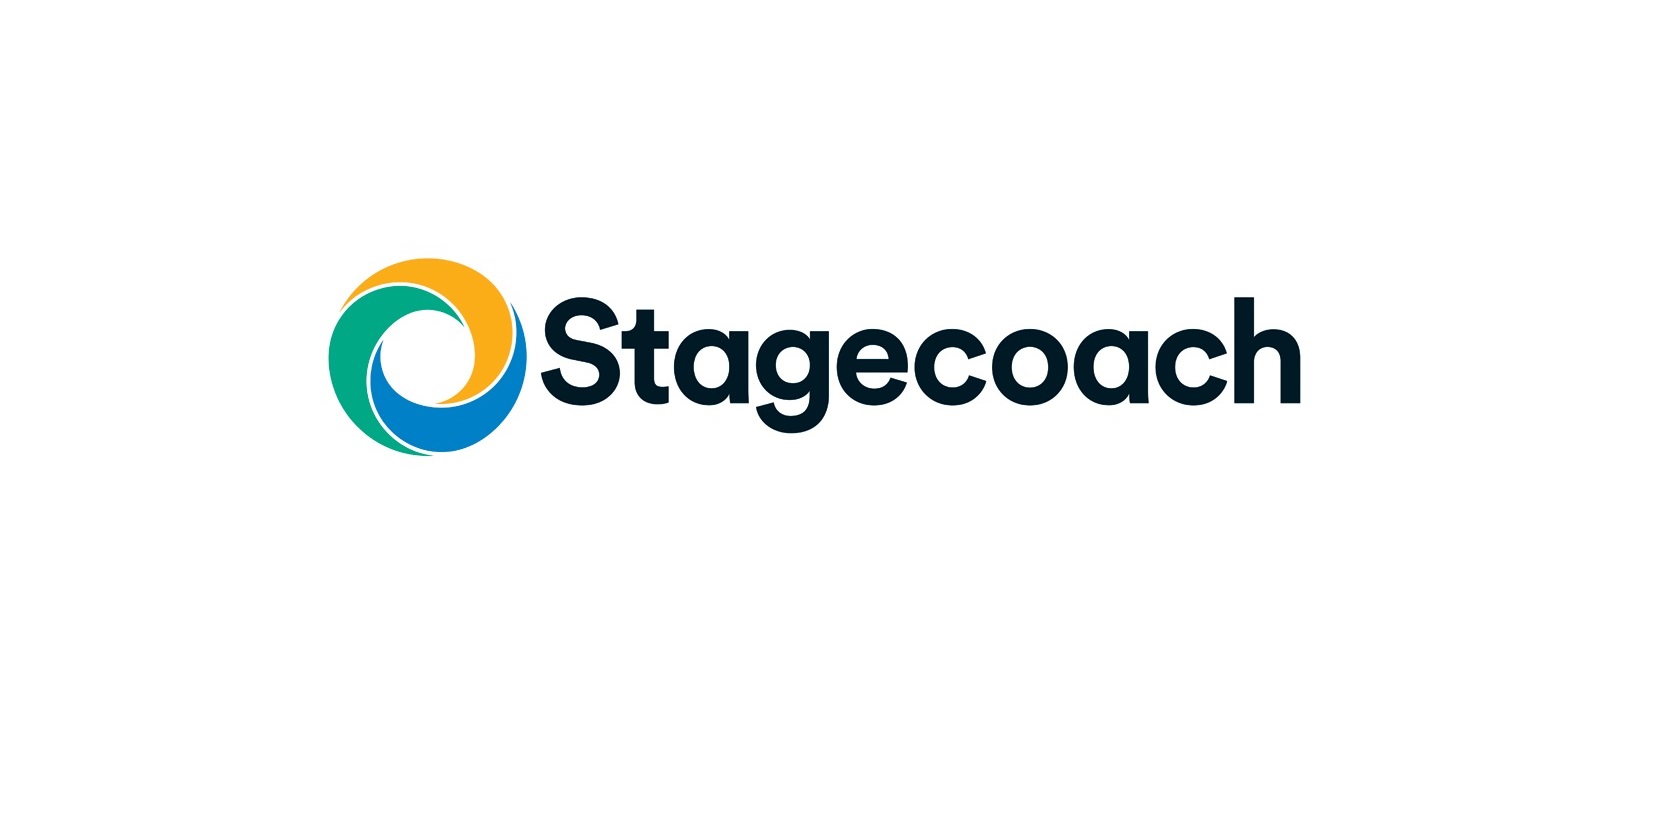 Stagecoach cites cost rises behind fare hike